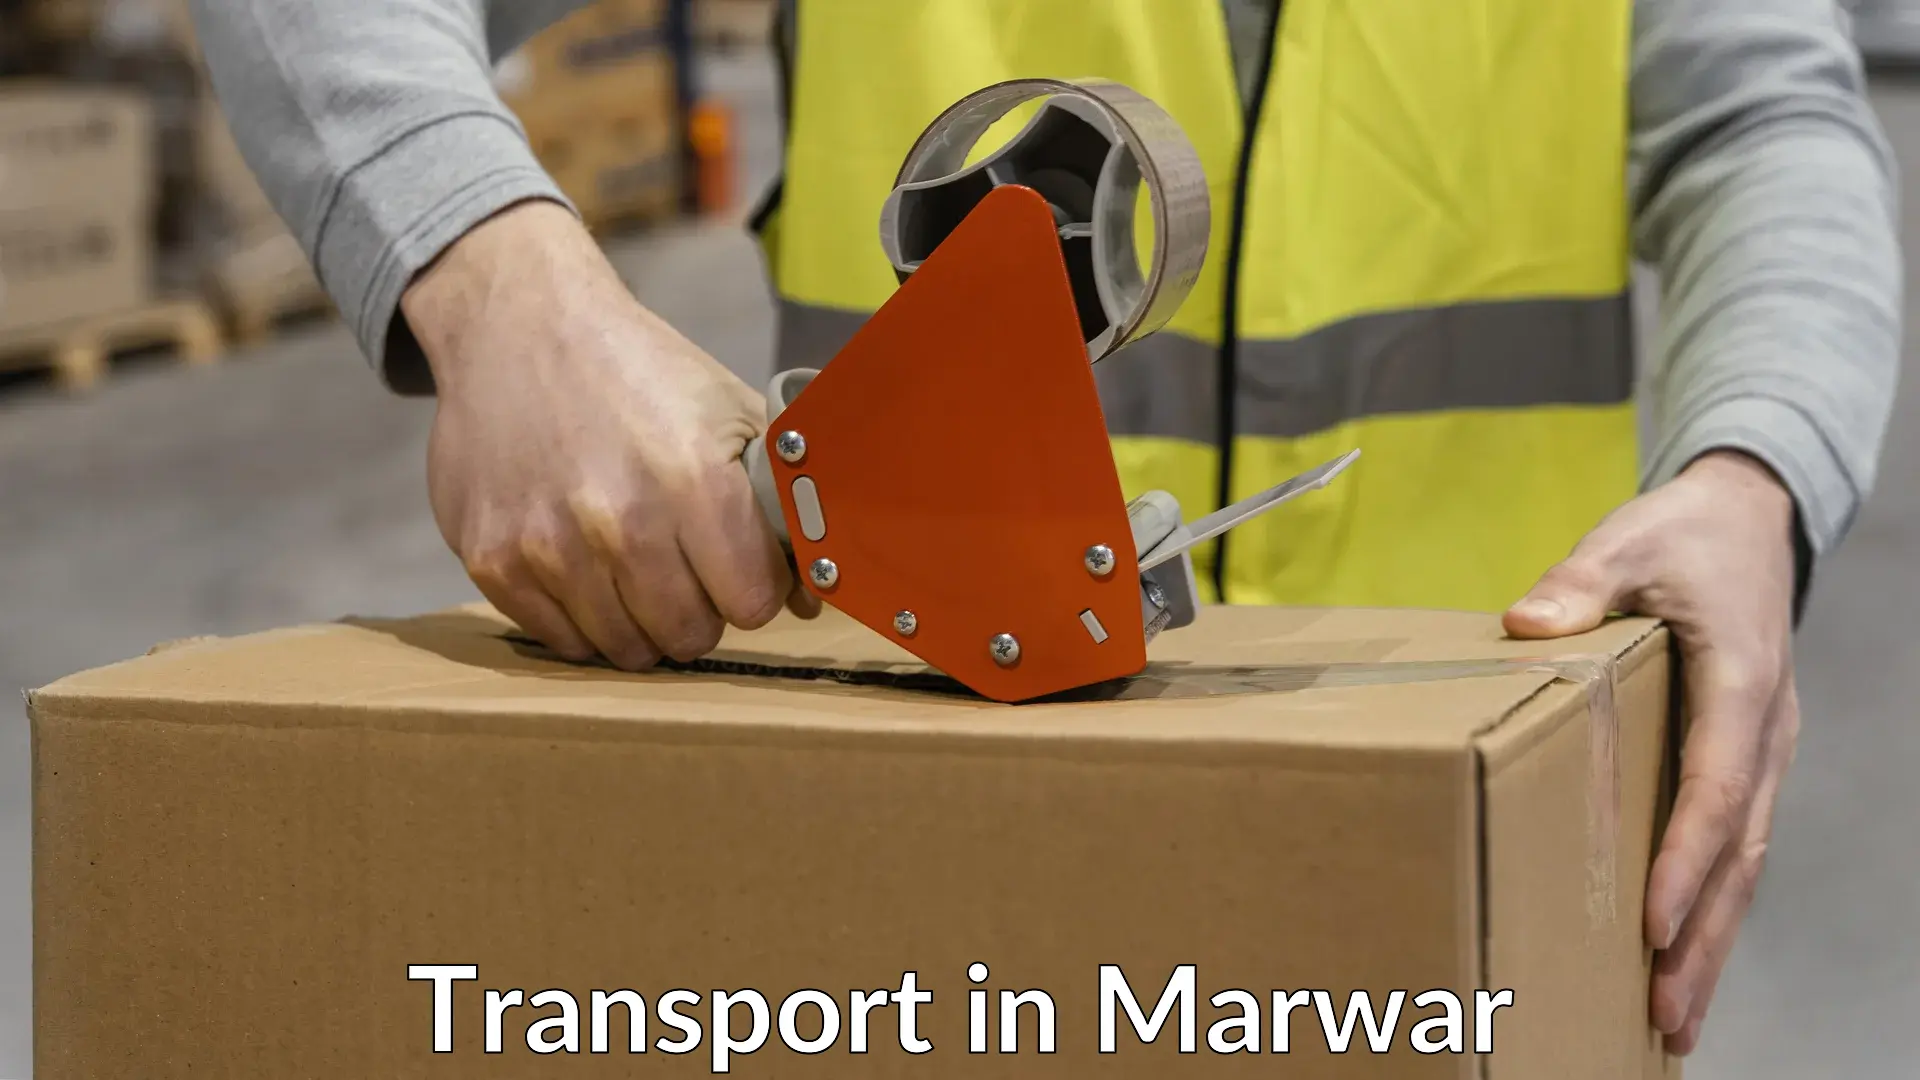 Transport shared services in Marwar